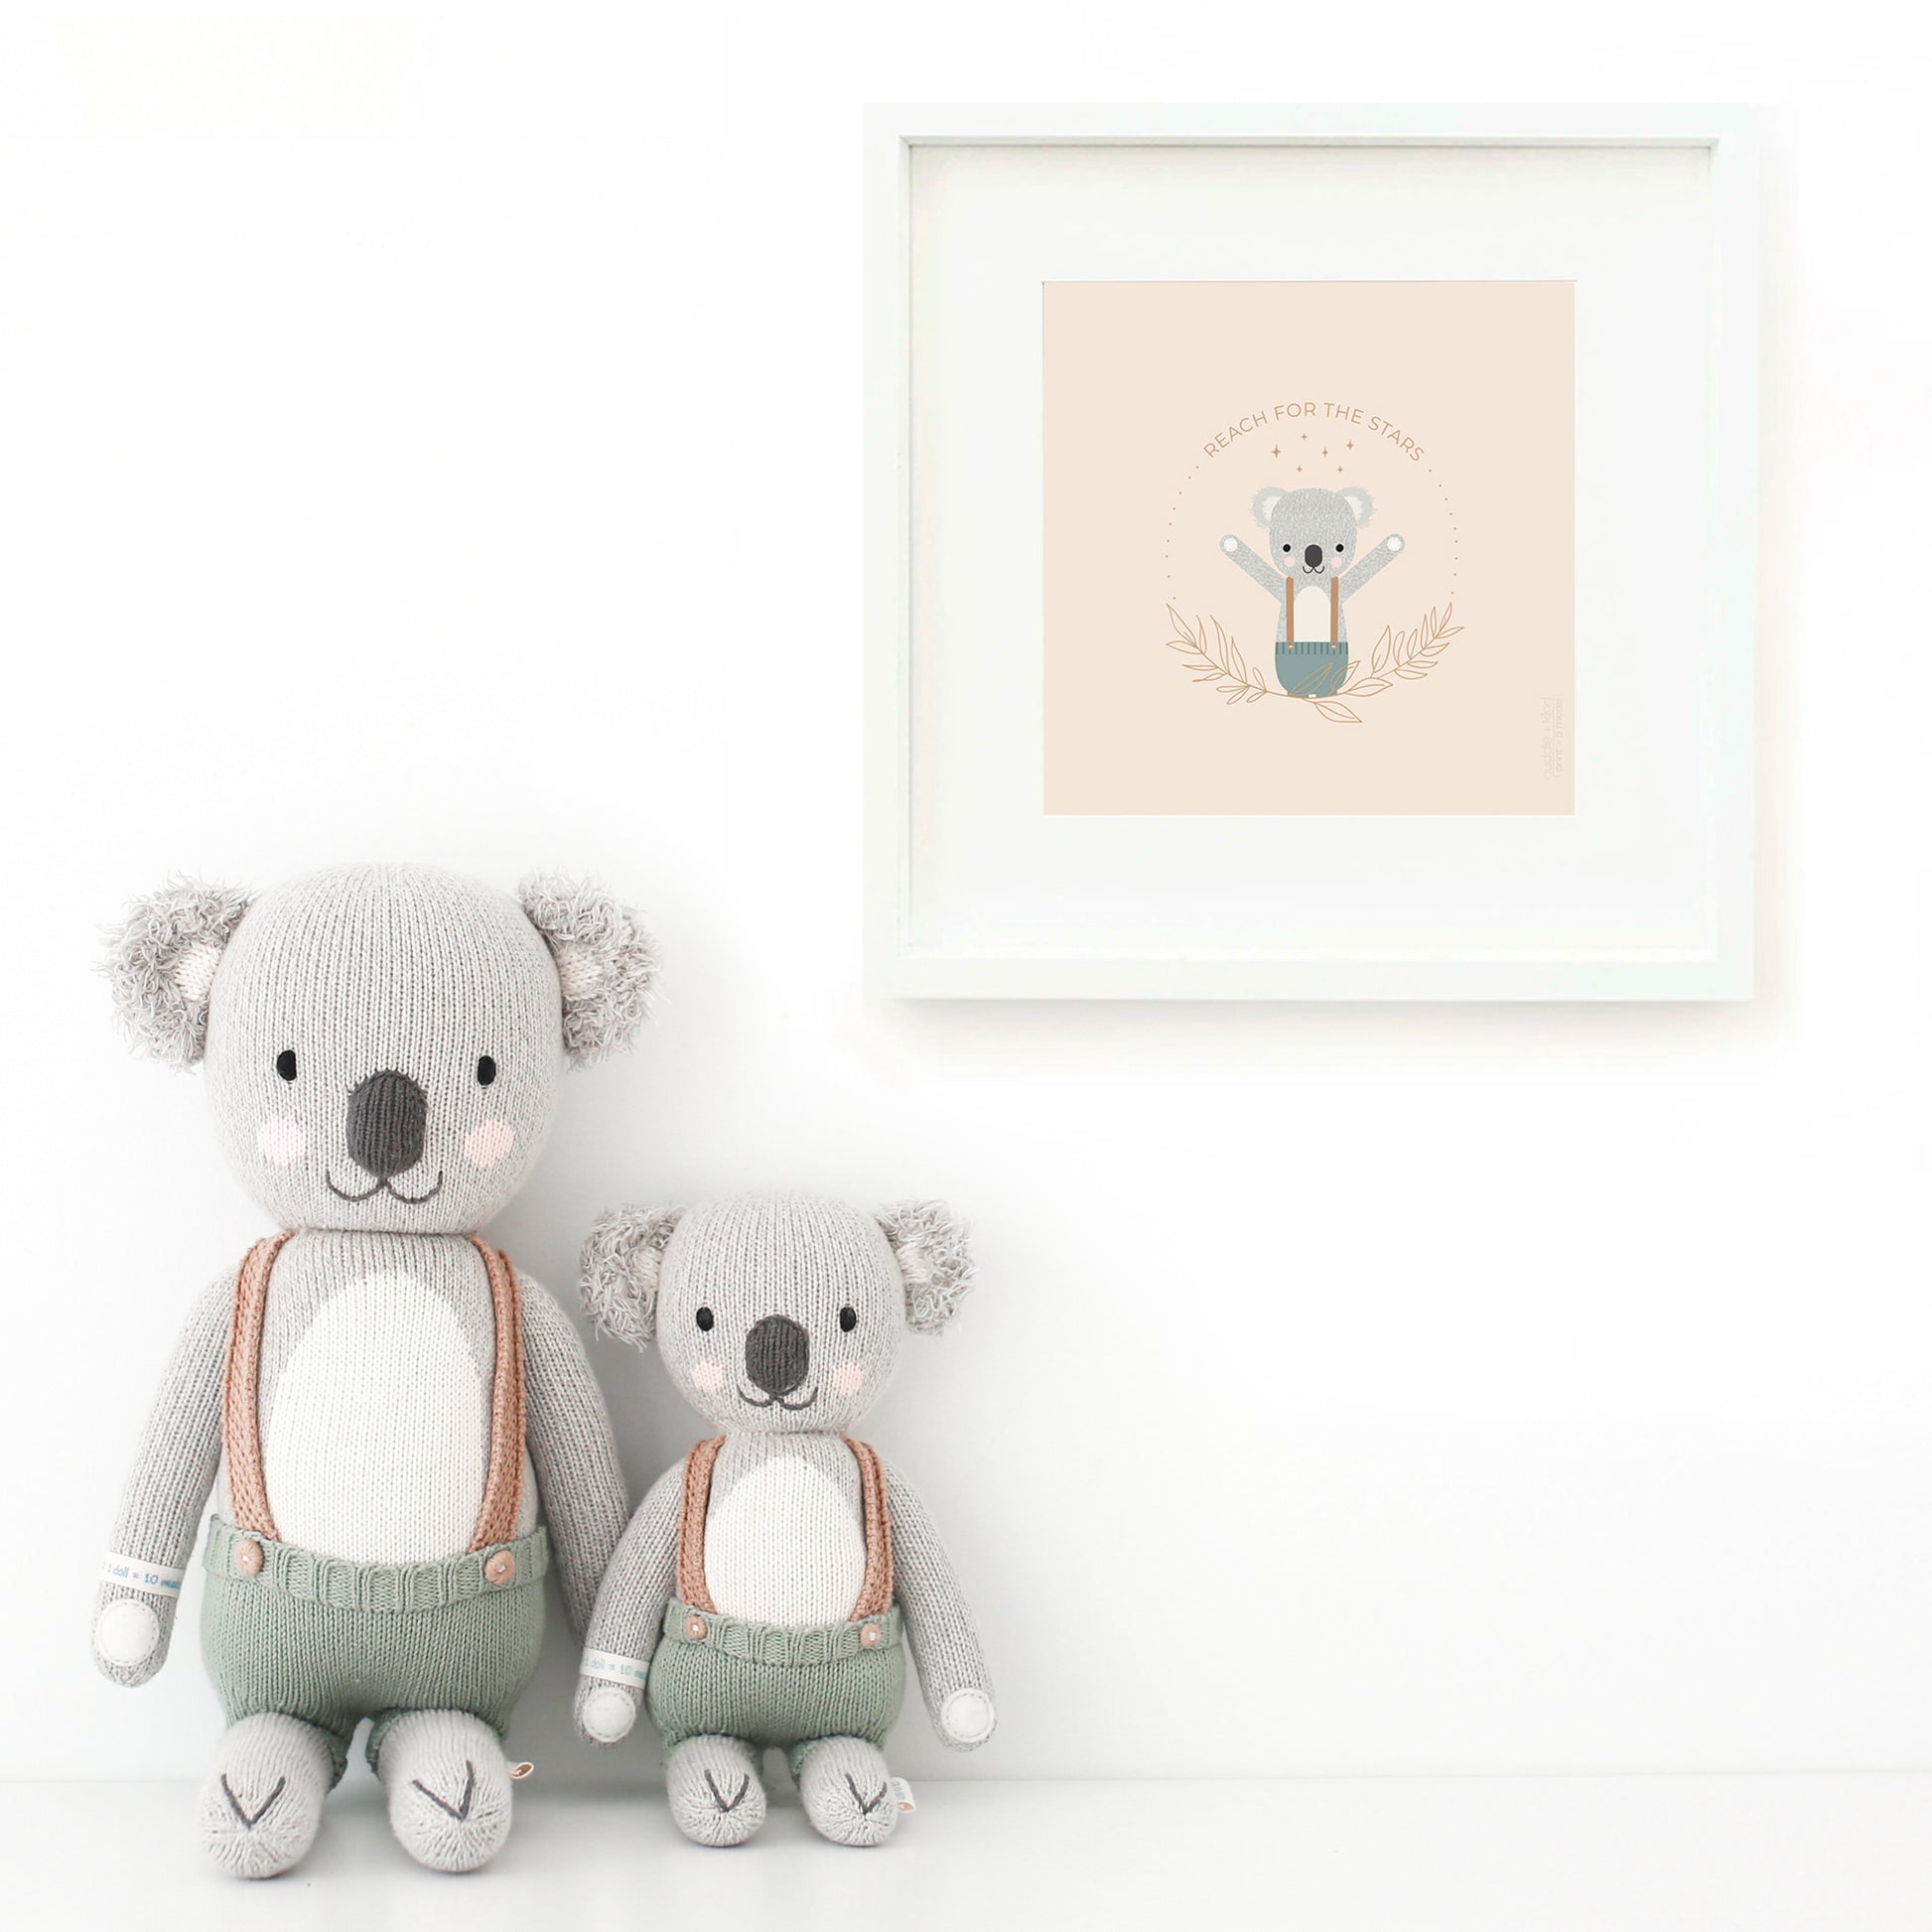 Two Quinn the koala stuffed dolls sitting beside a framed print with a picture of Quinn that says “Reach for the stars.”